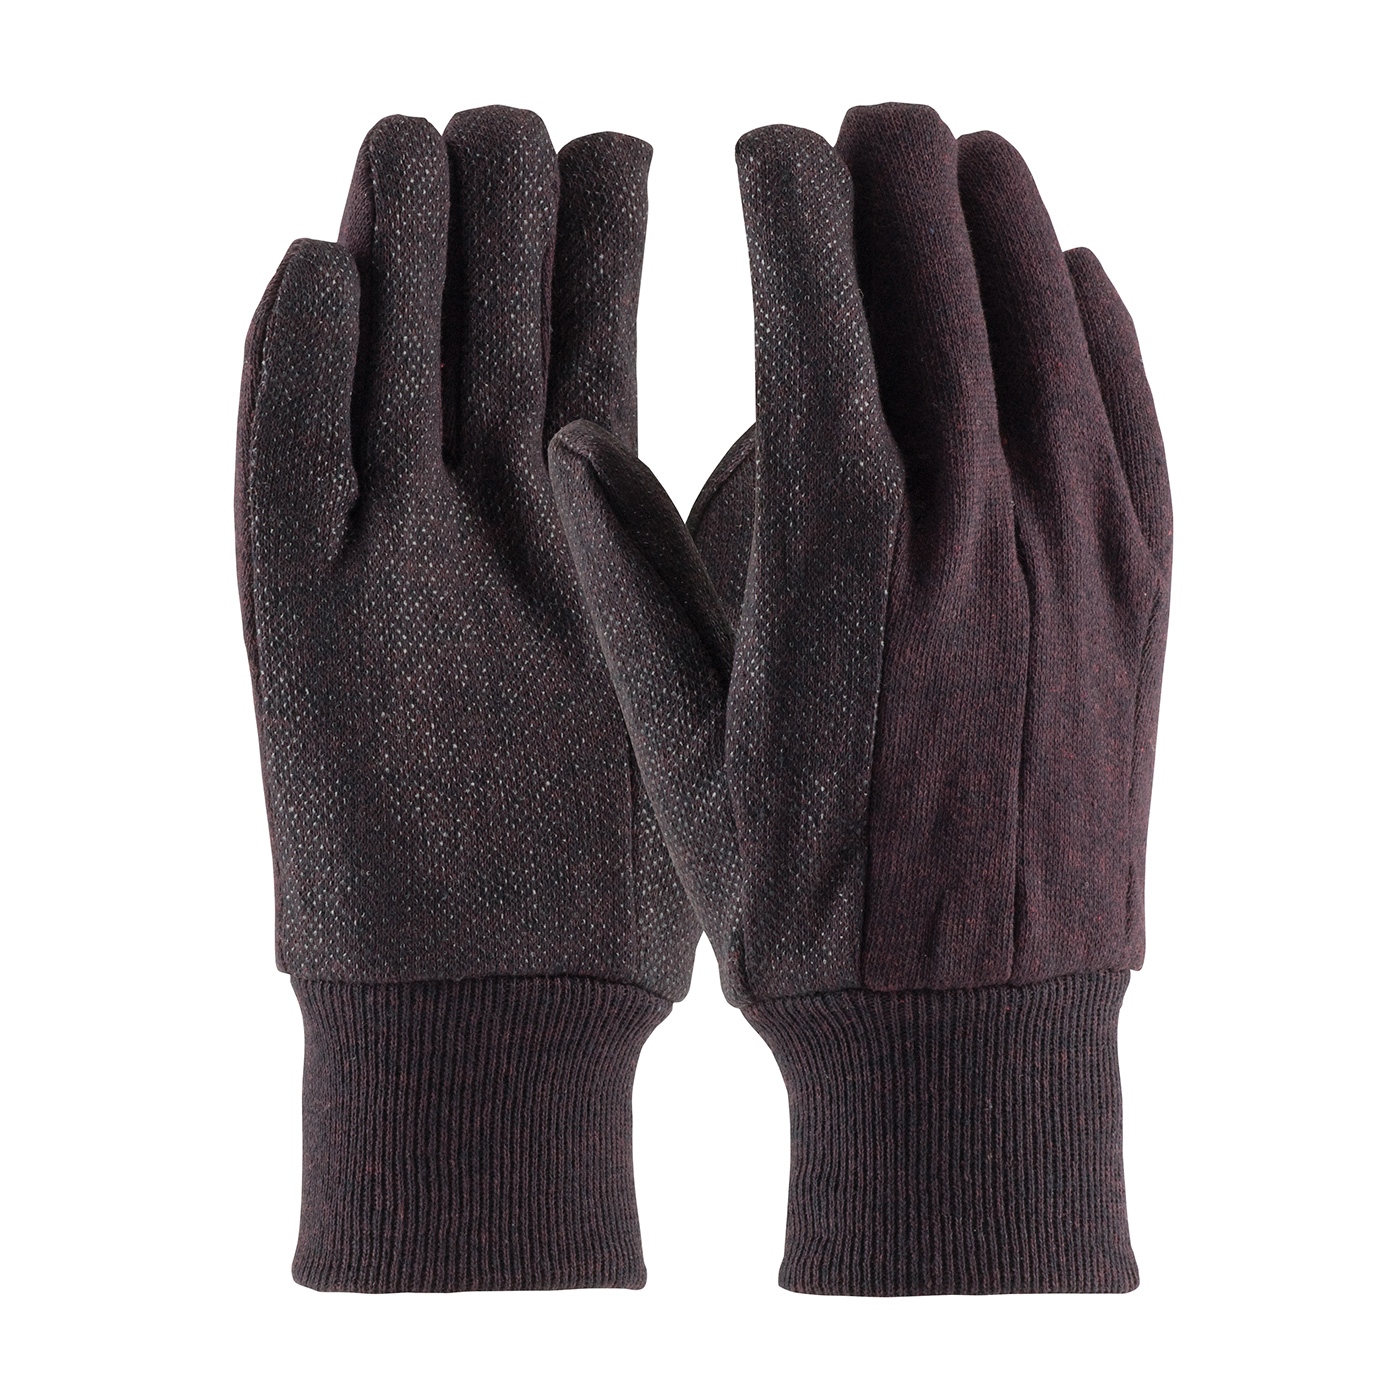 PIP® 95-809PD Regular Weight General Purpose Gloves, Fabric/Work, Clute Cut/Full Finger/Straight Thumb Style, Universal, PVC Palm, Cotton/Jersey/Polyester, Brown, Knit Wrist Cuff, PVC Coating, Resists: Abrasion and Cut, Cotton/Polyester Lining